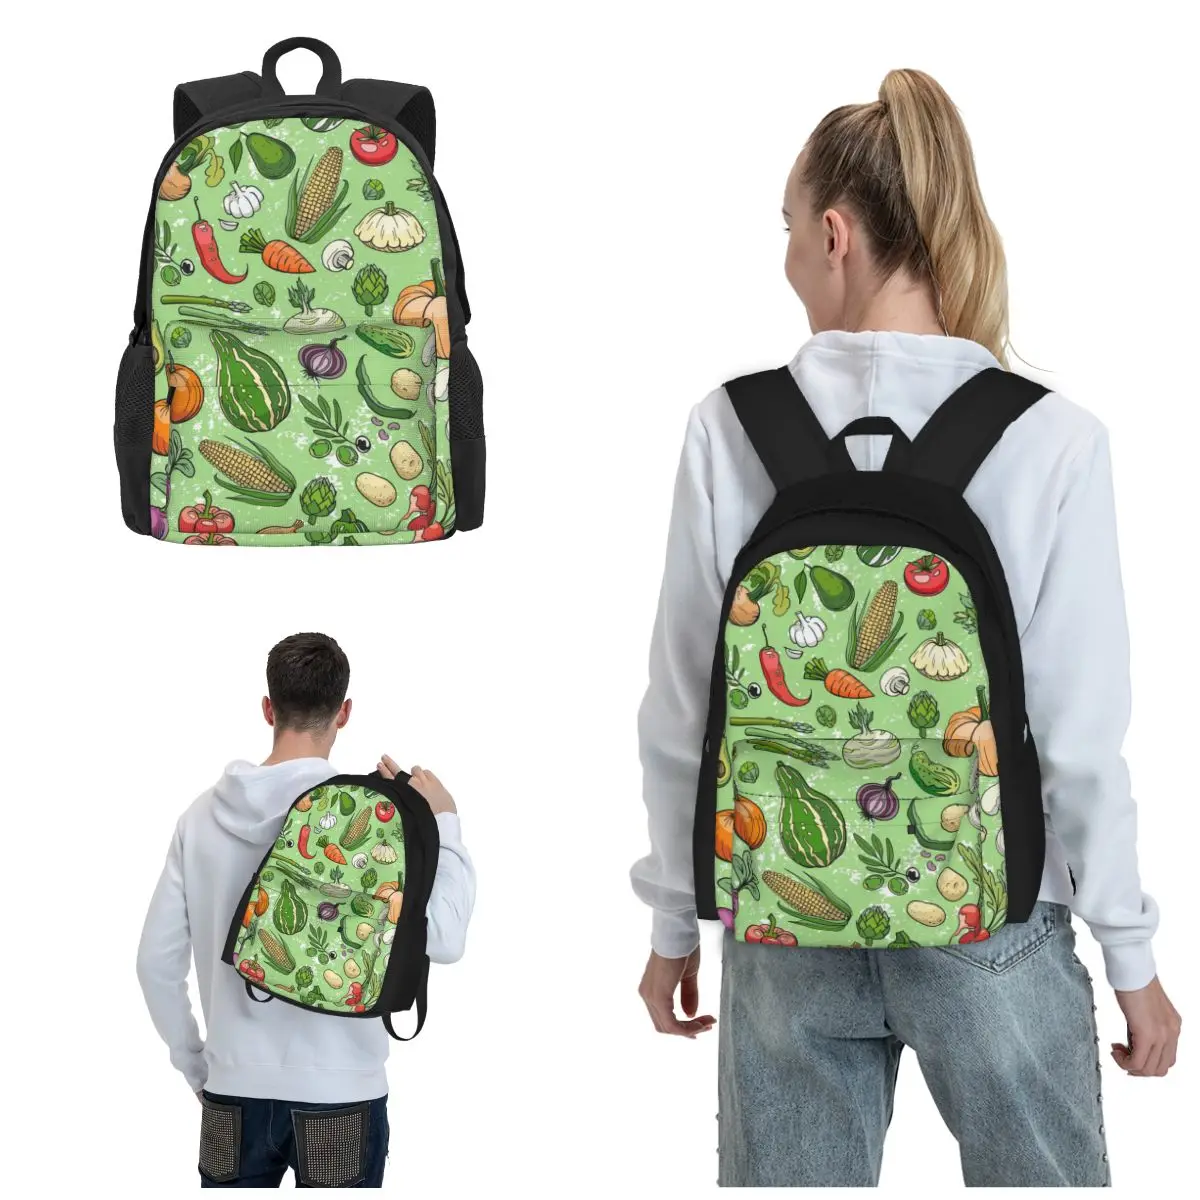 

Avocado Carrot Mushrooms Pack Your Aspirations In Our Thoughtfully Designed Backpacks Travel Sport Outdoor Storage Bag